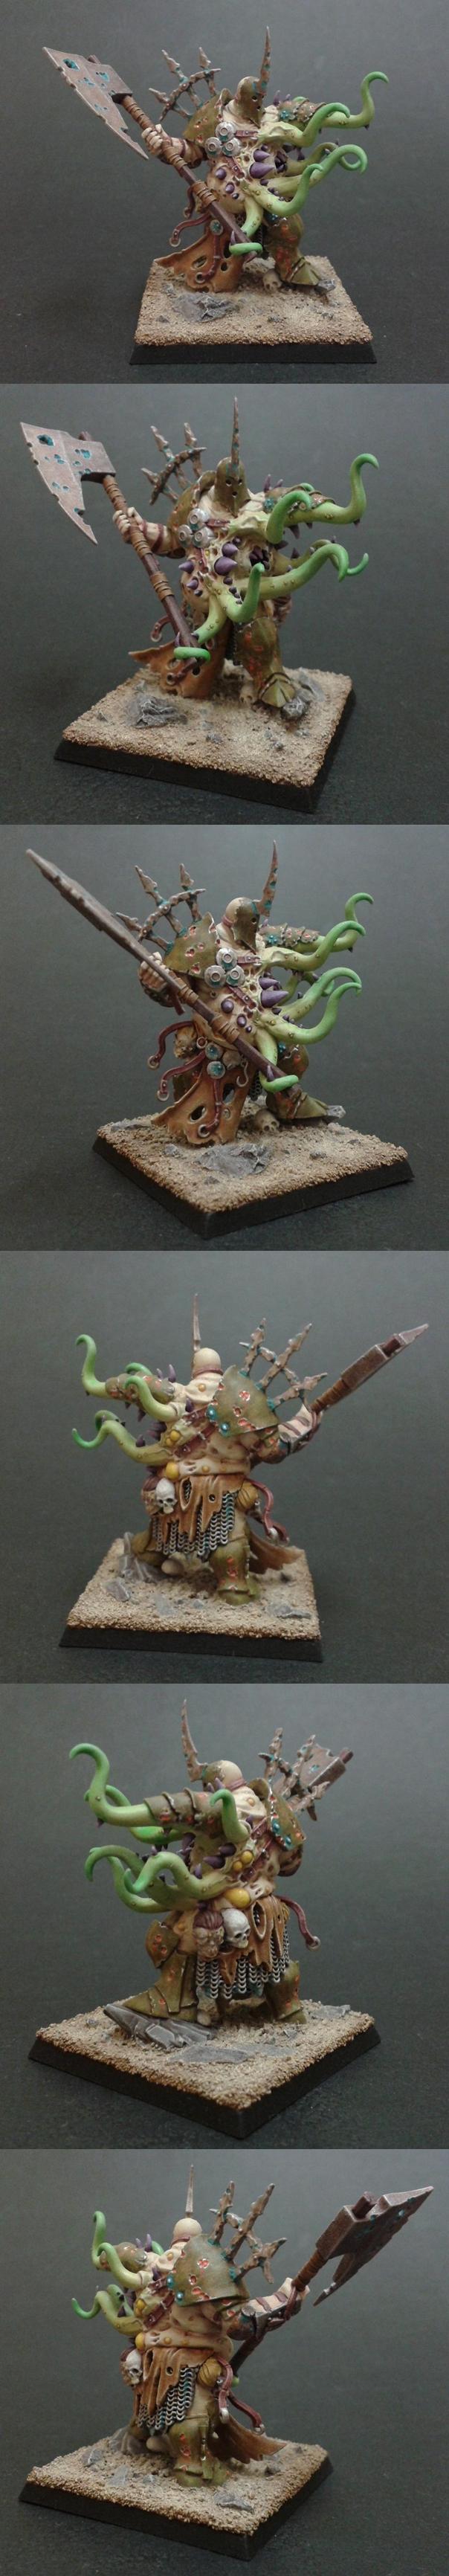 Chaos, Chaos Lord, Gutrot Spume, Nurgle, Warhammer Fantasy, Warriors Of Chaos, Wfb